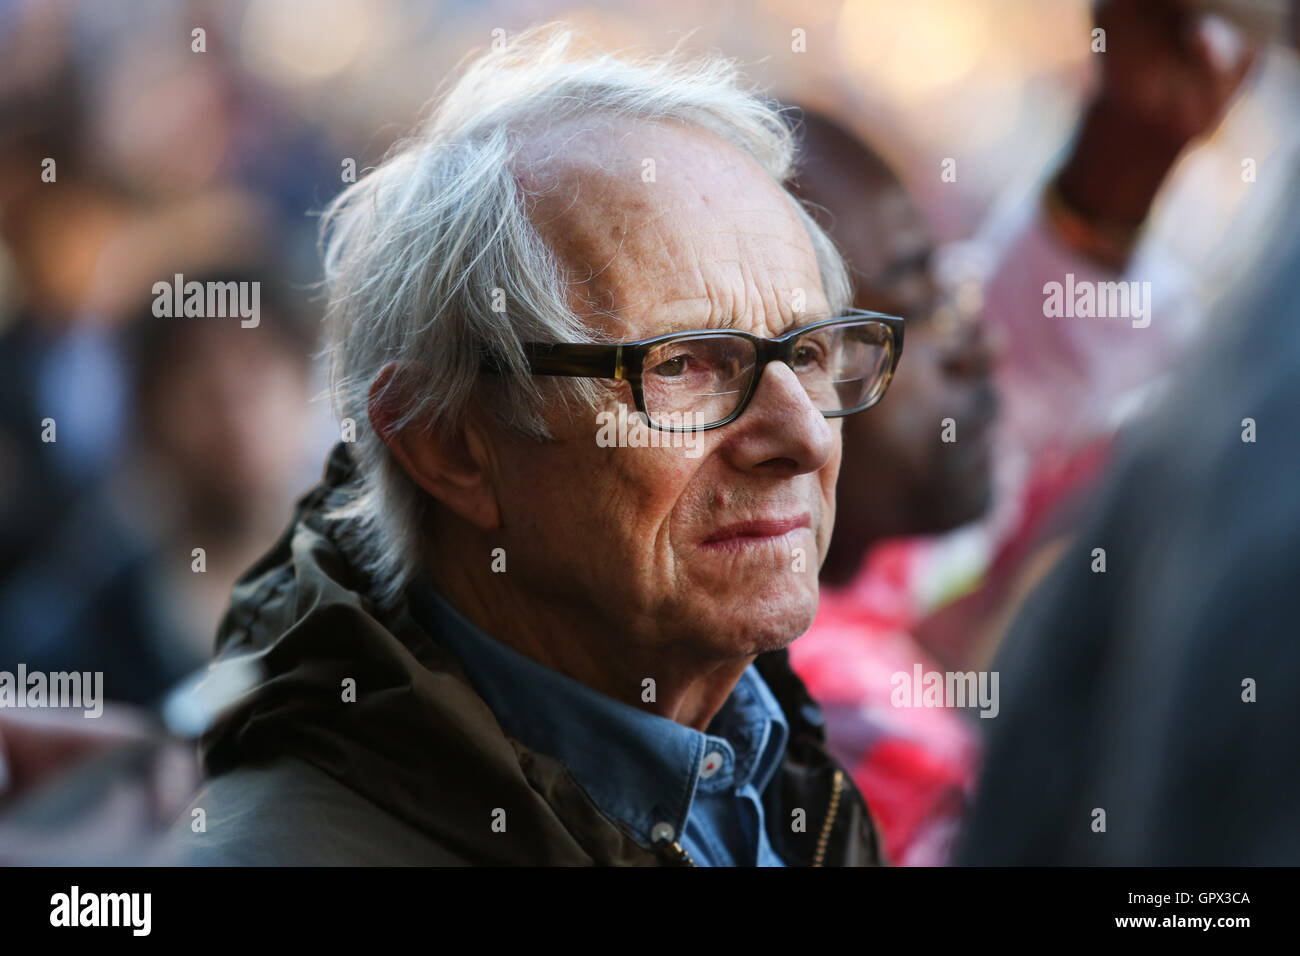 Sheffield, UK. Film director Ken Loach at a Jeremy Corbyn campaign rally in Sheffield, South Yorkshire. Stock Photo